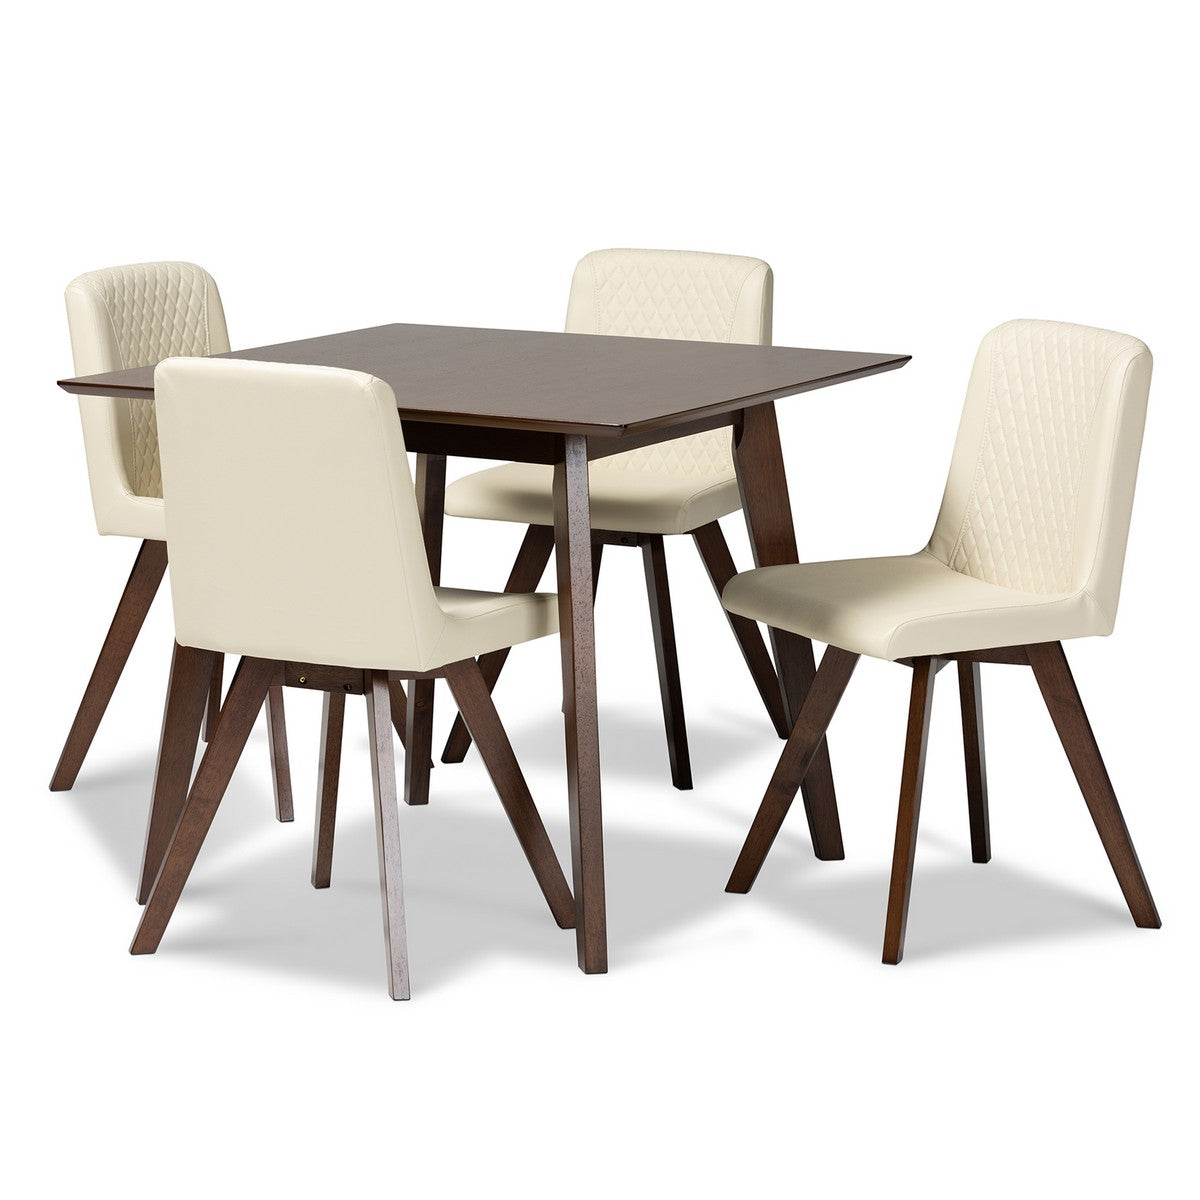 Baxton Studio Pernille Modern Transitional Cream Faux Leather Upholstered Walnut Finished Wood 5-Piece Dining Set Baxton Studio-Dining Sets-Minimal And Modern - 1